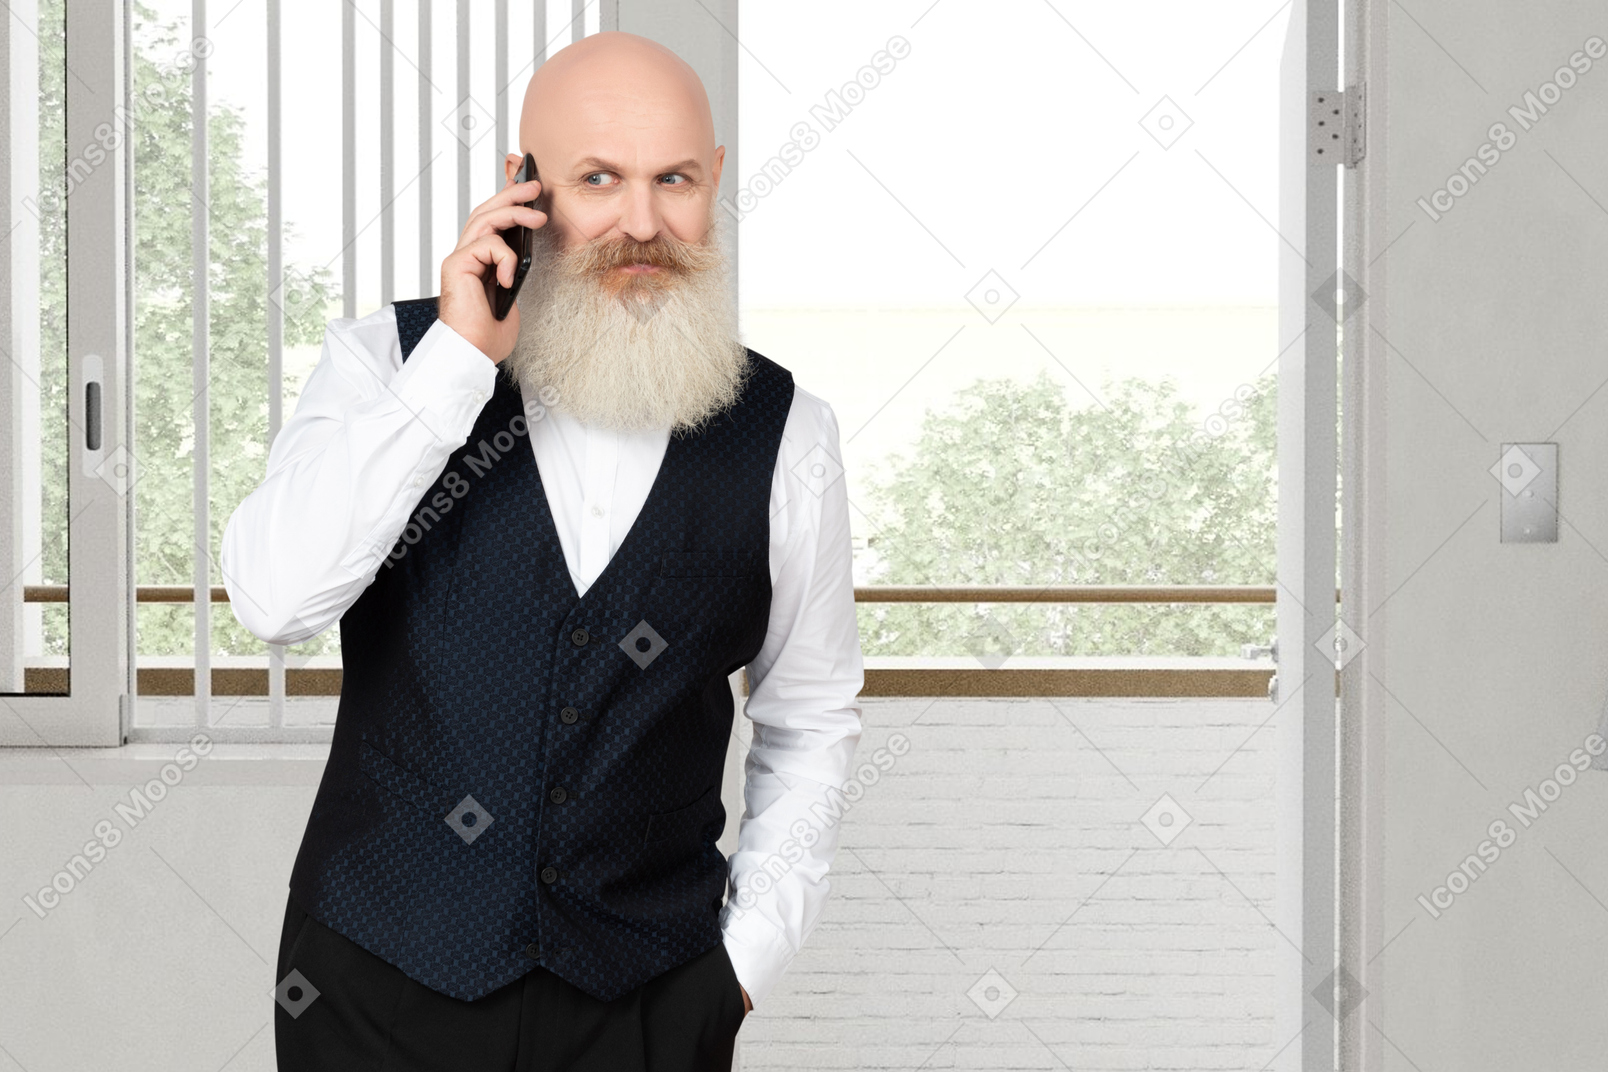 A bald man in a vest talking on a cell phone